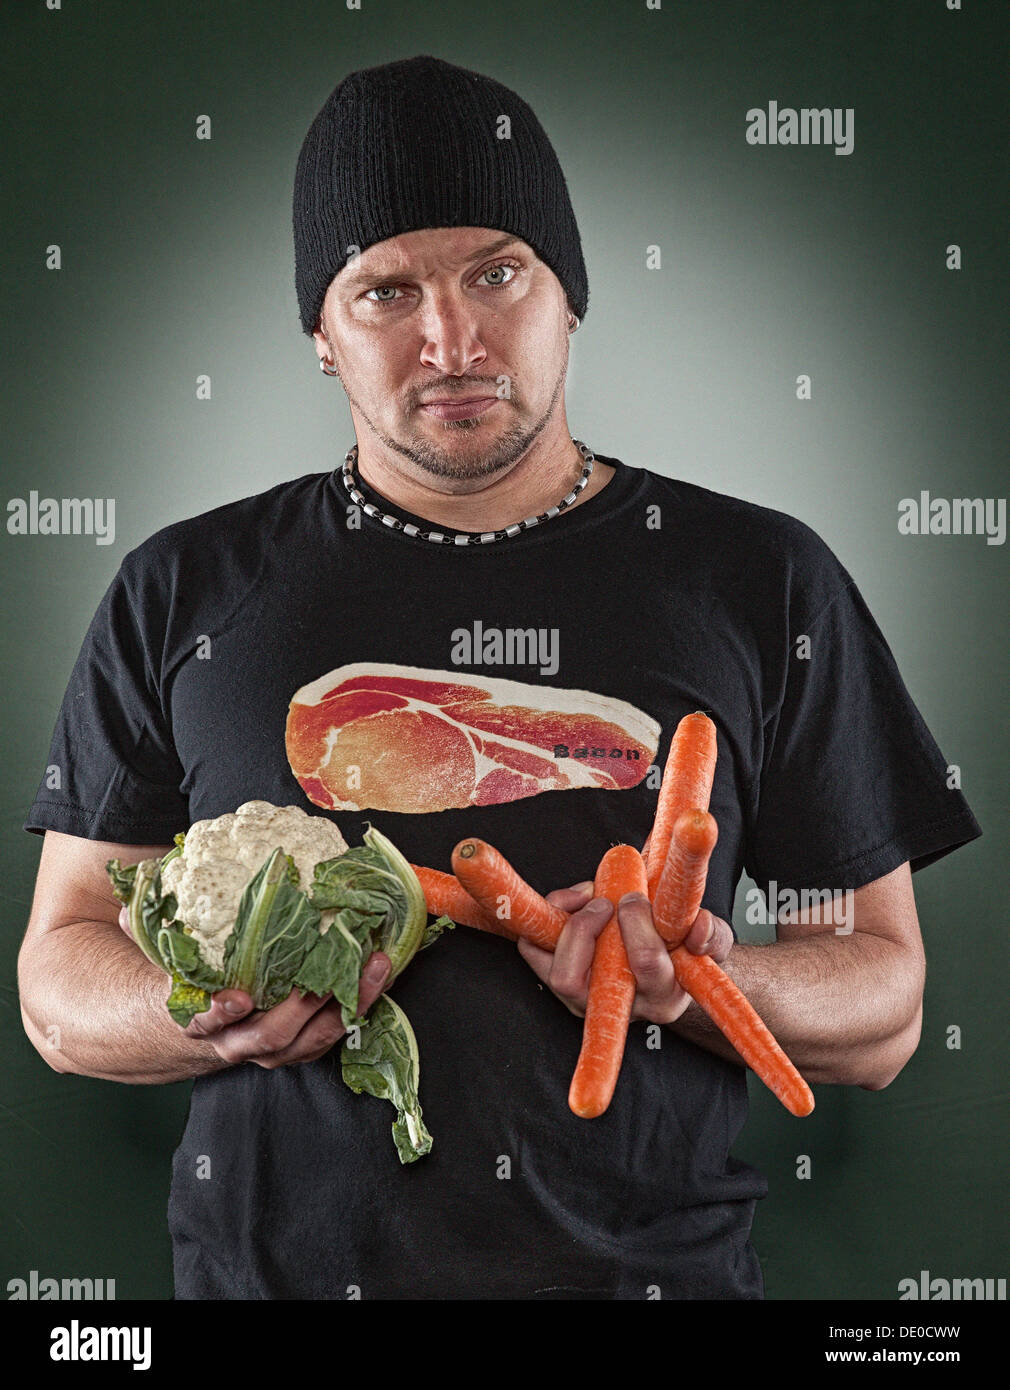 Man with a meat image on his T-shirt holding cauliflower and carrots in his hands Stock Photo